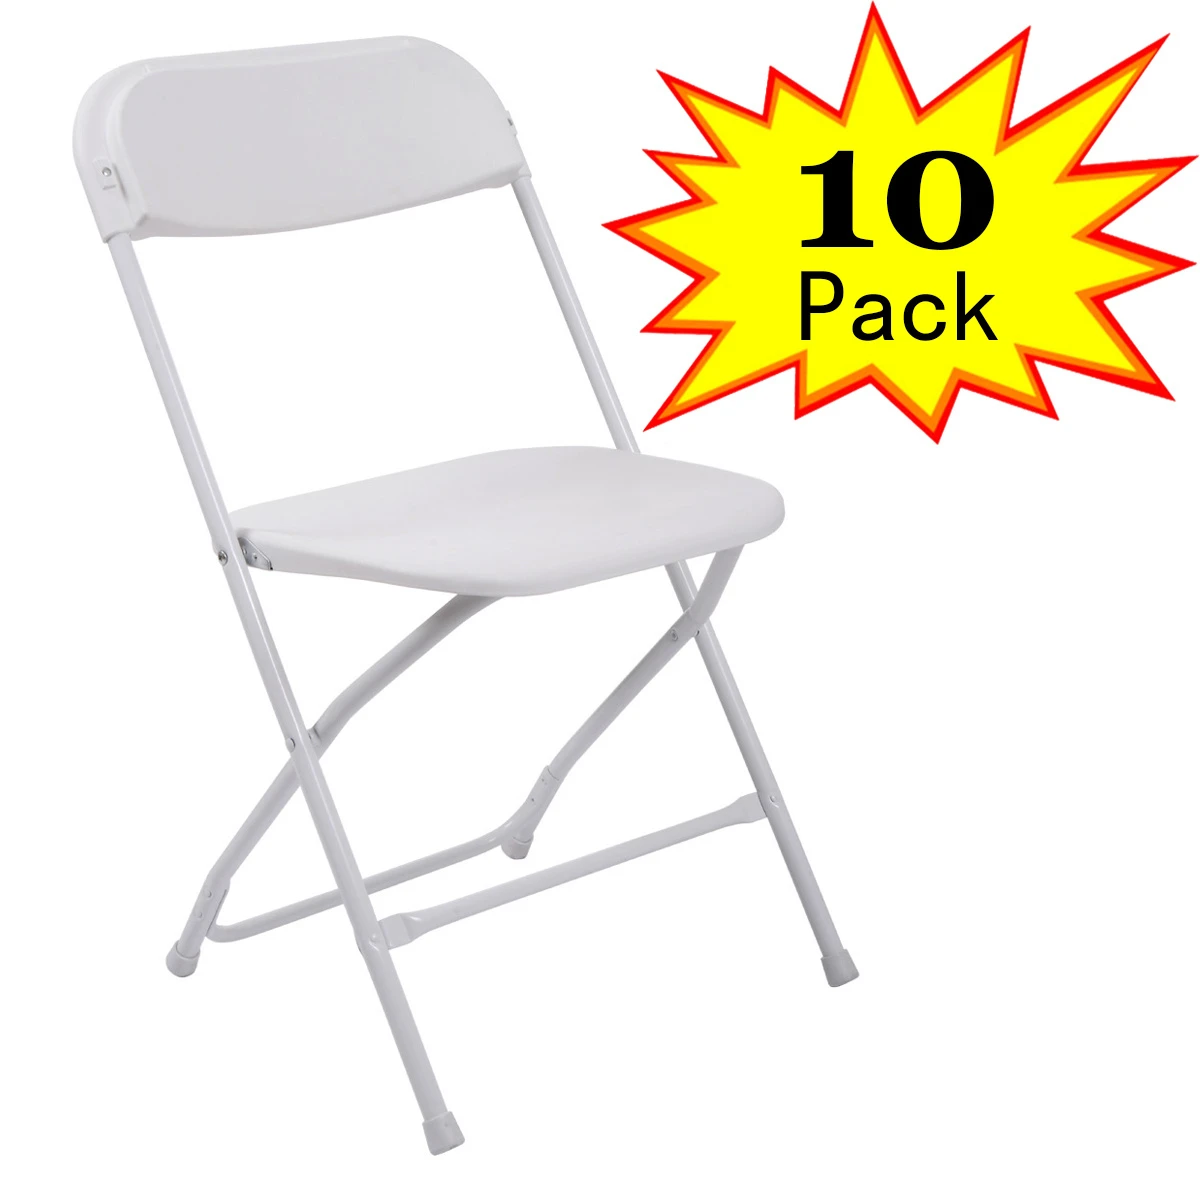 office chairs near me 10 or 5 White Plastic Folding Chair for Wedding Commercial Events Stackable Folding Chairs[US-W] used office furniture near me